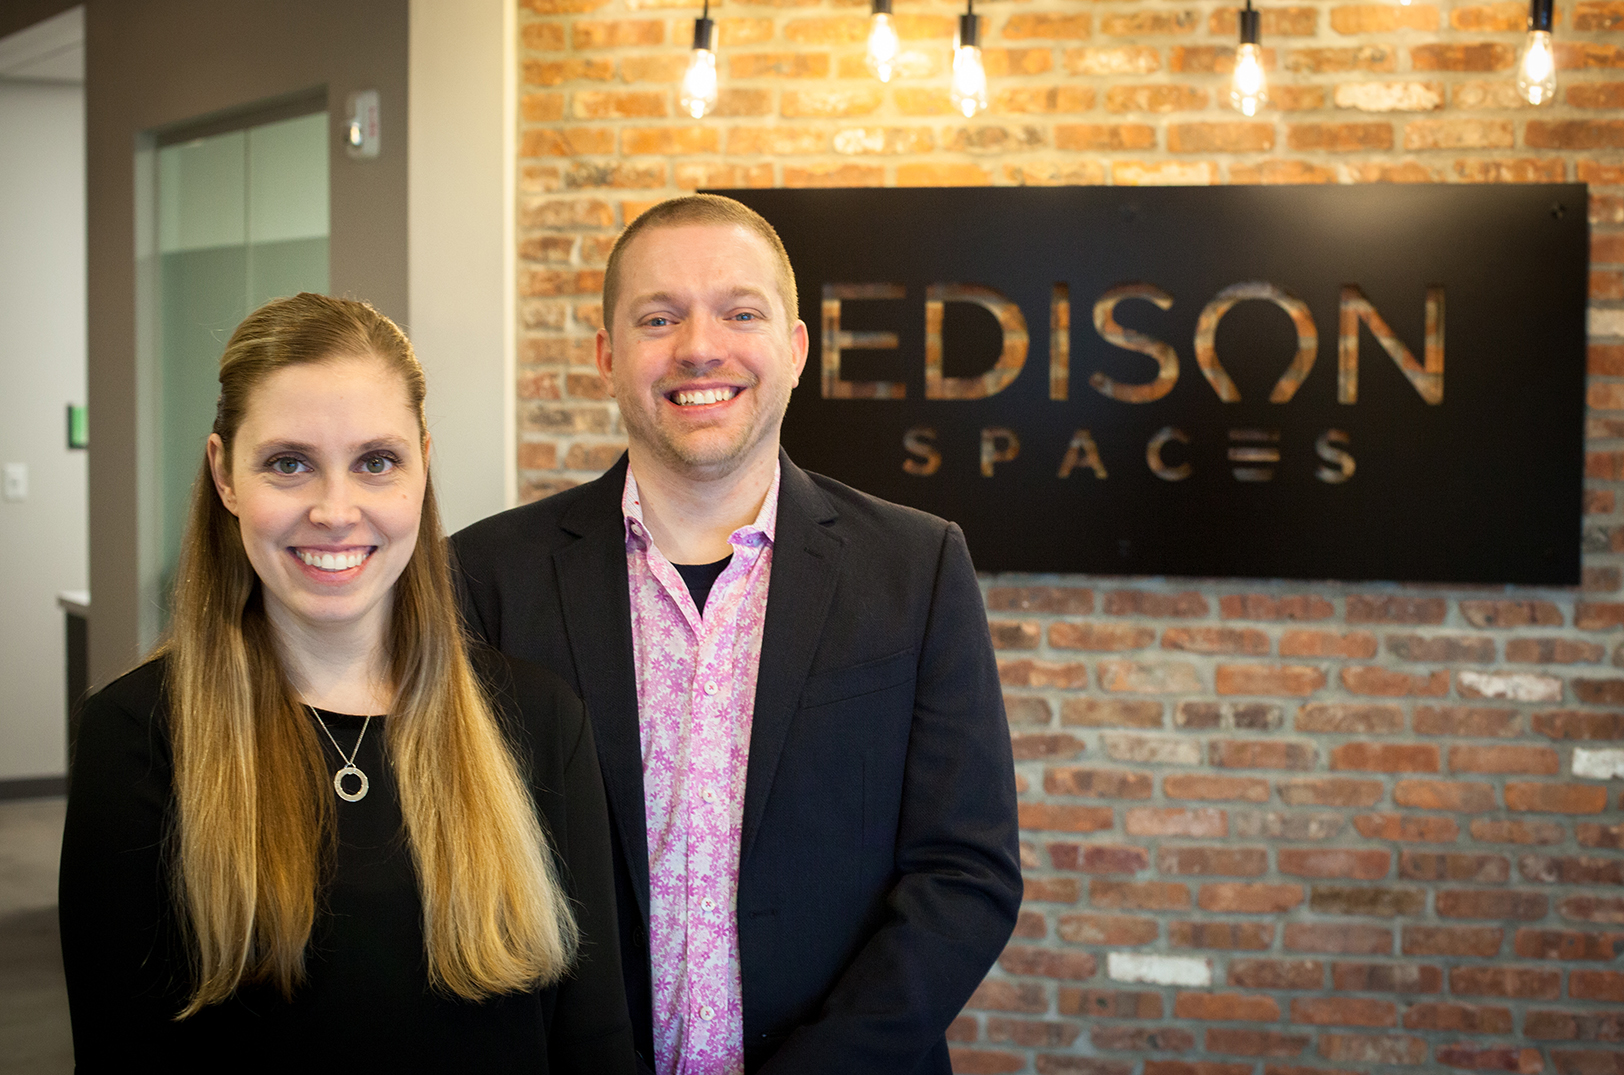 Edison Spaces selects two startups for its inaugural Jumpstart office space giveaway